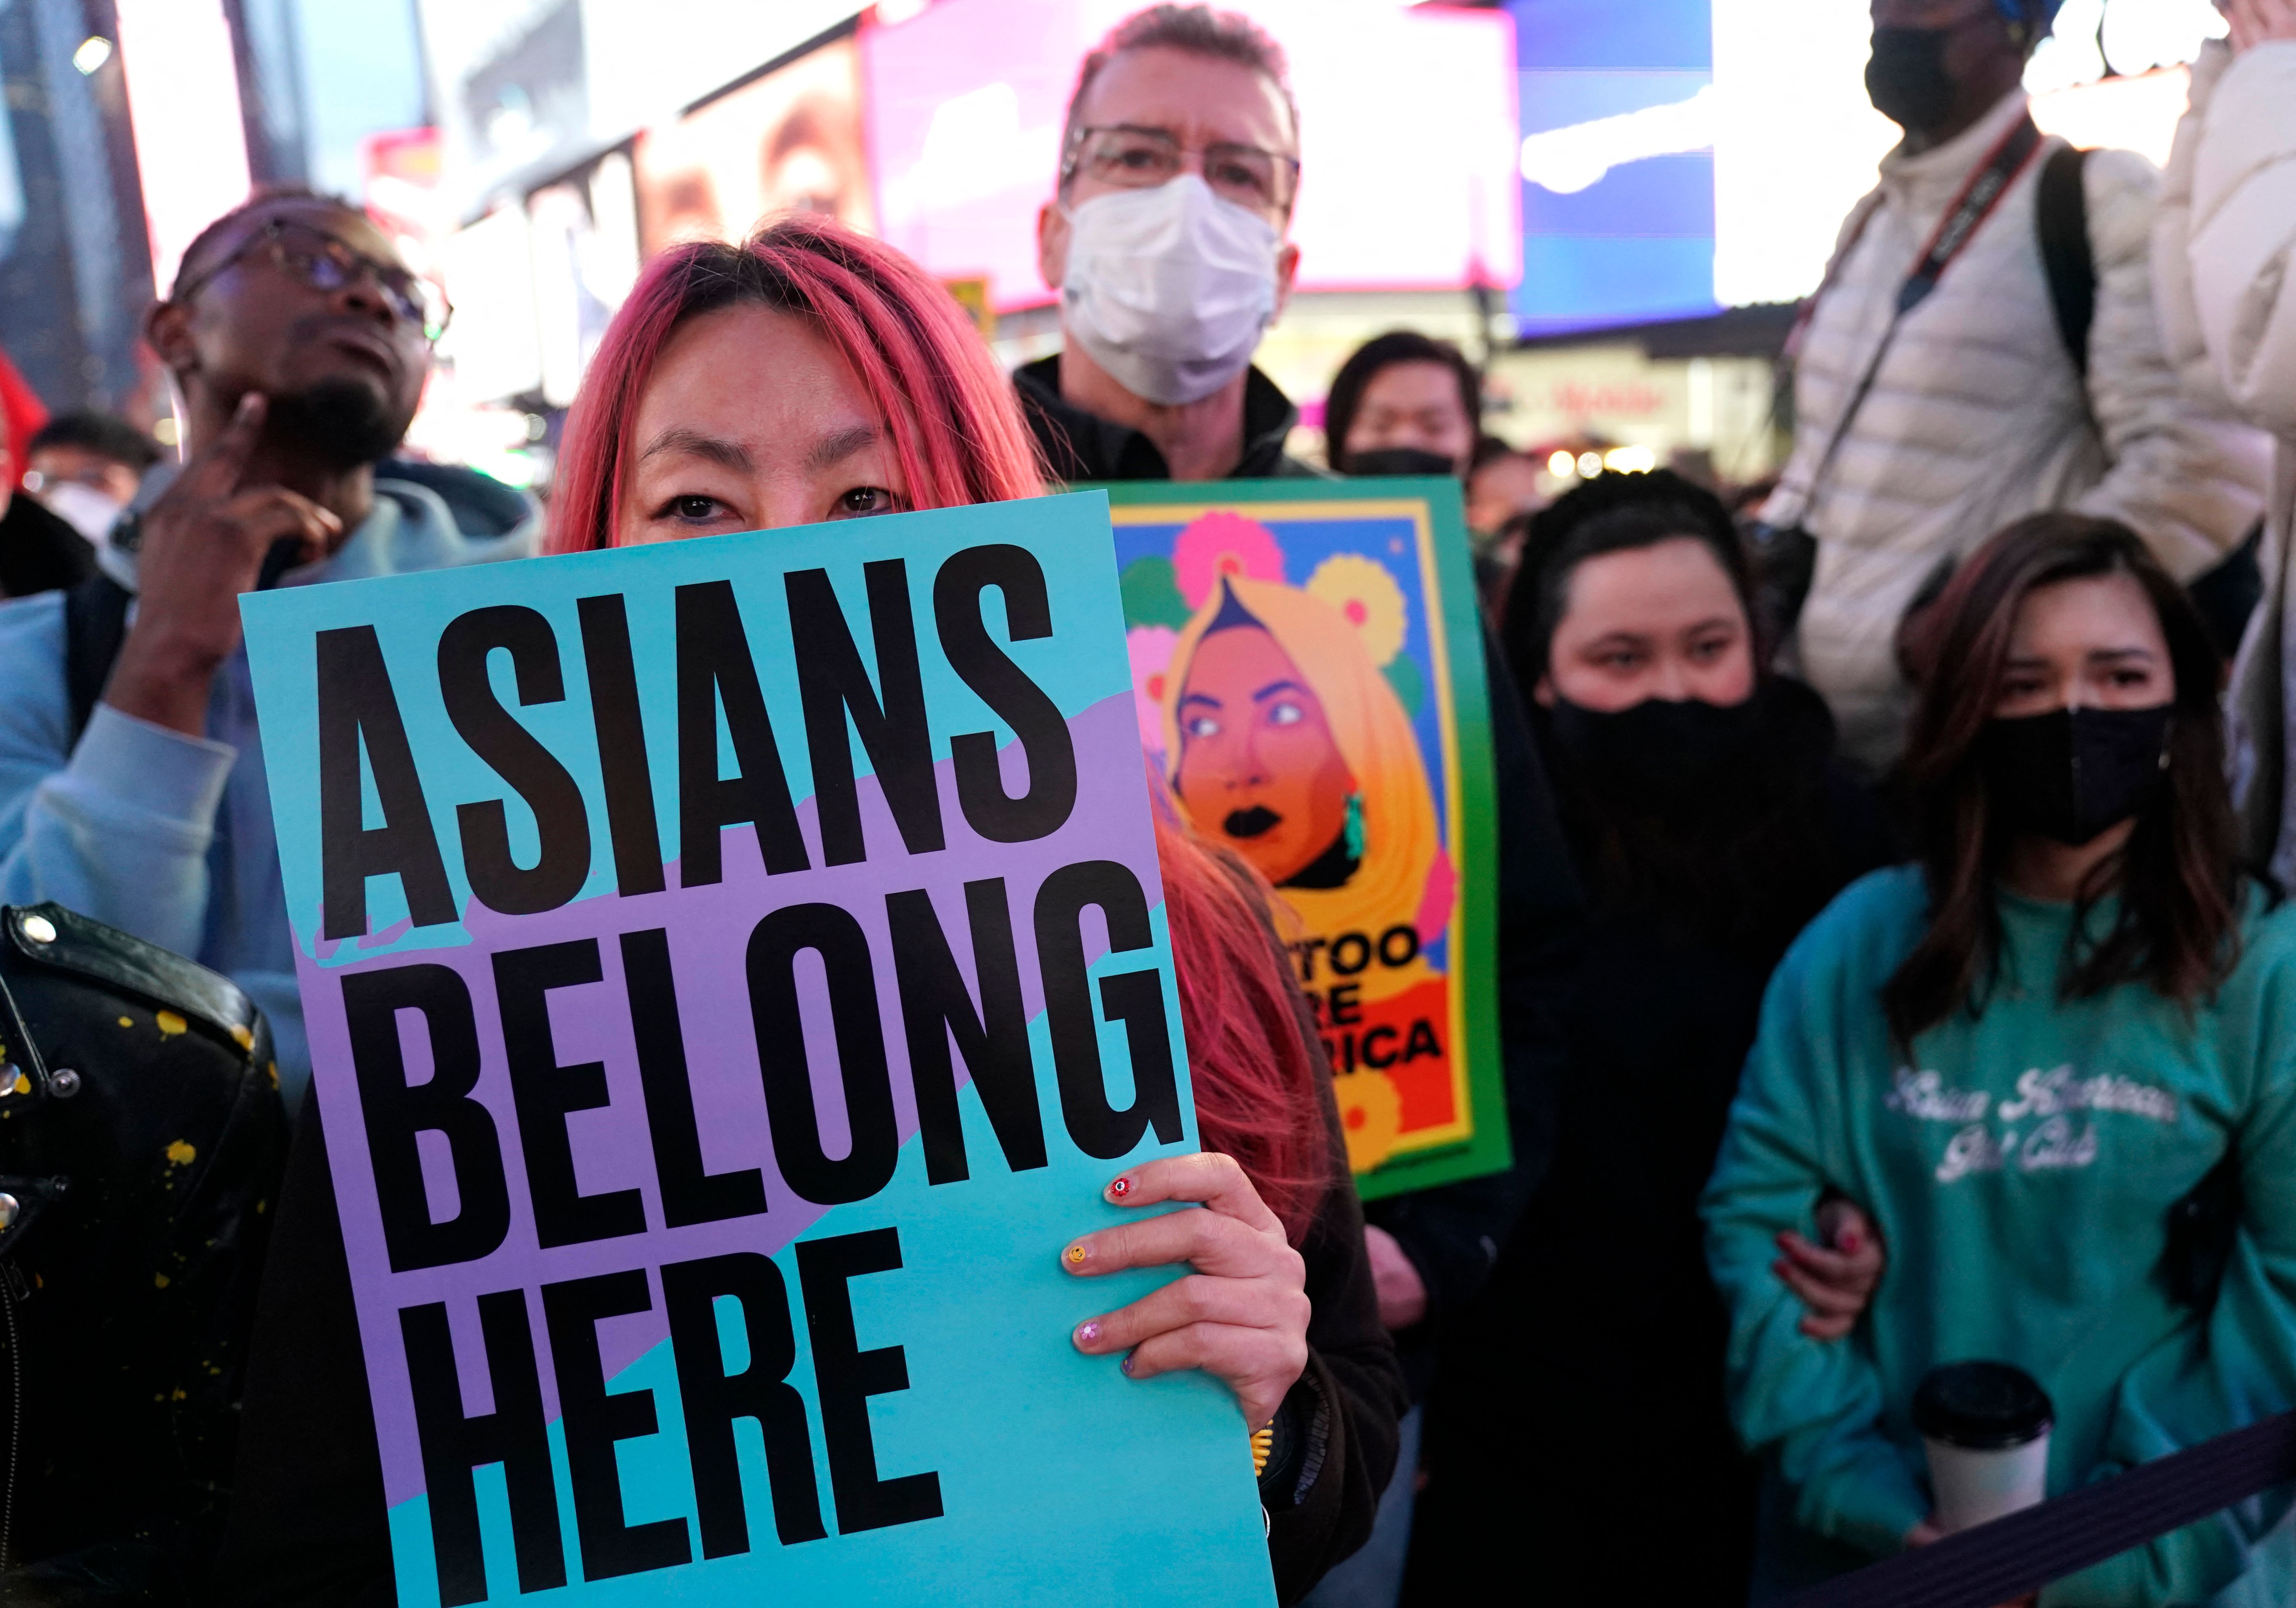 Photo of a person holding a sign that says "Asians belong here," with other people nearby